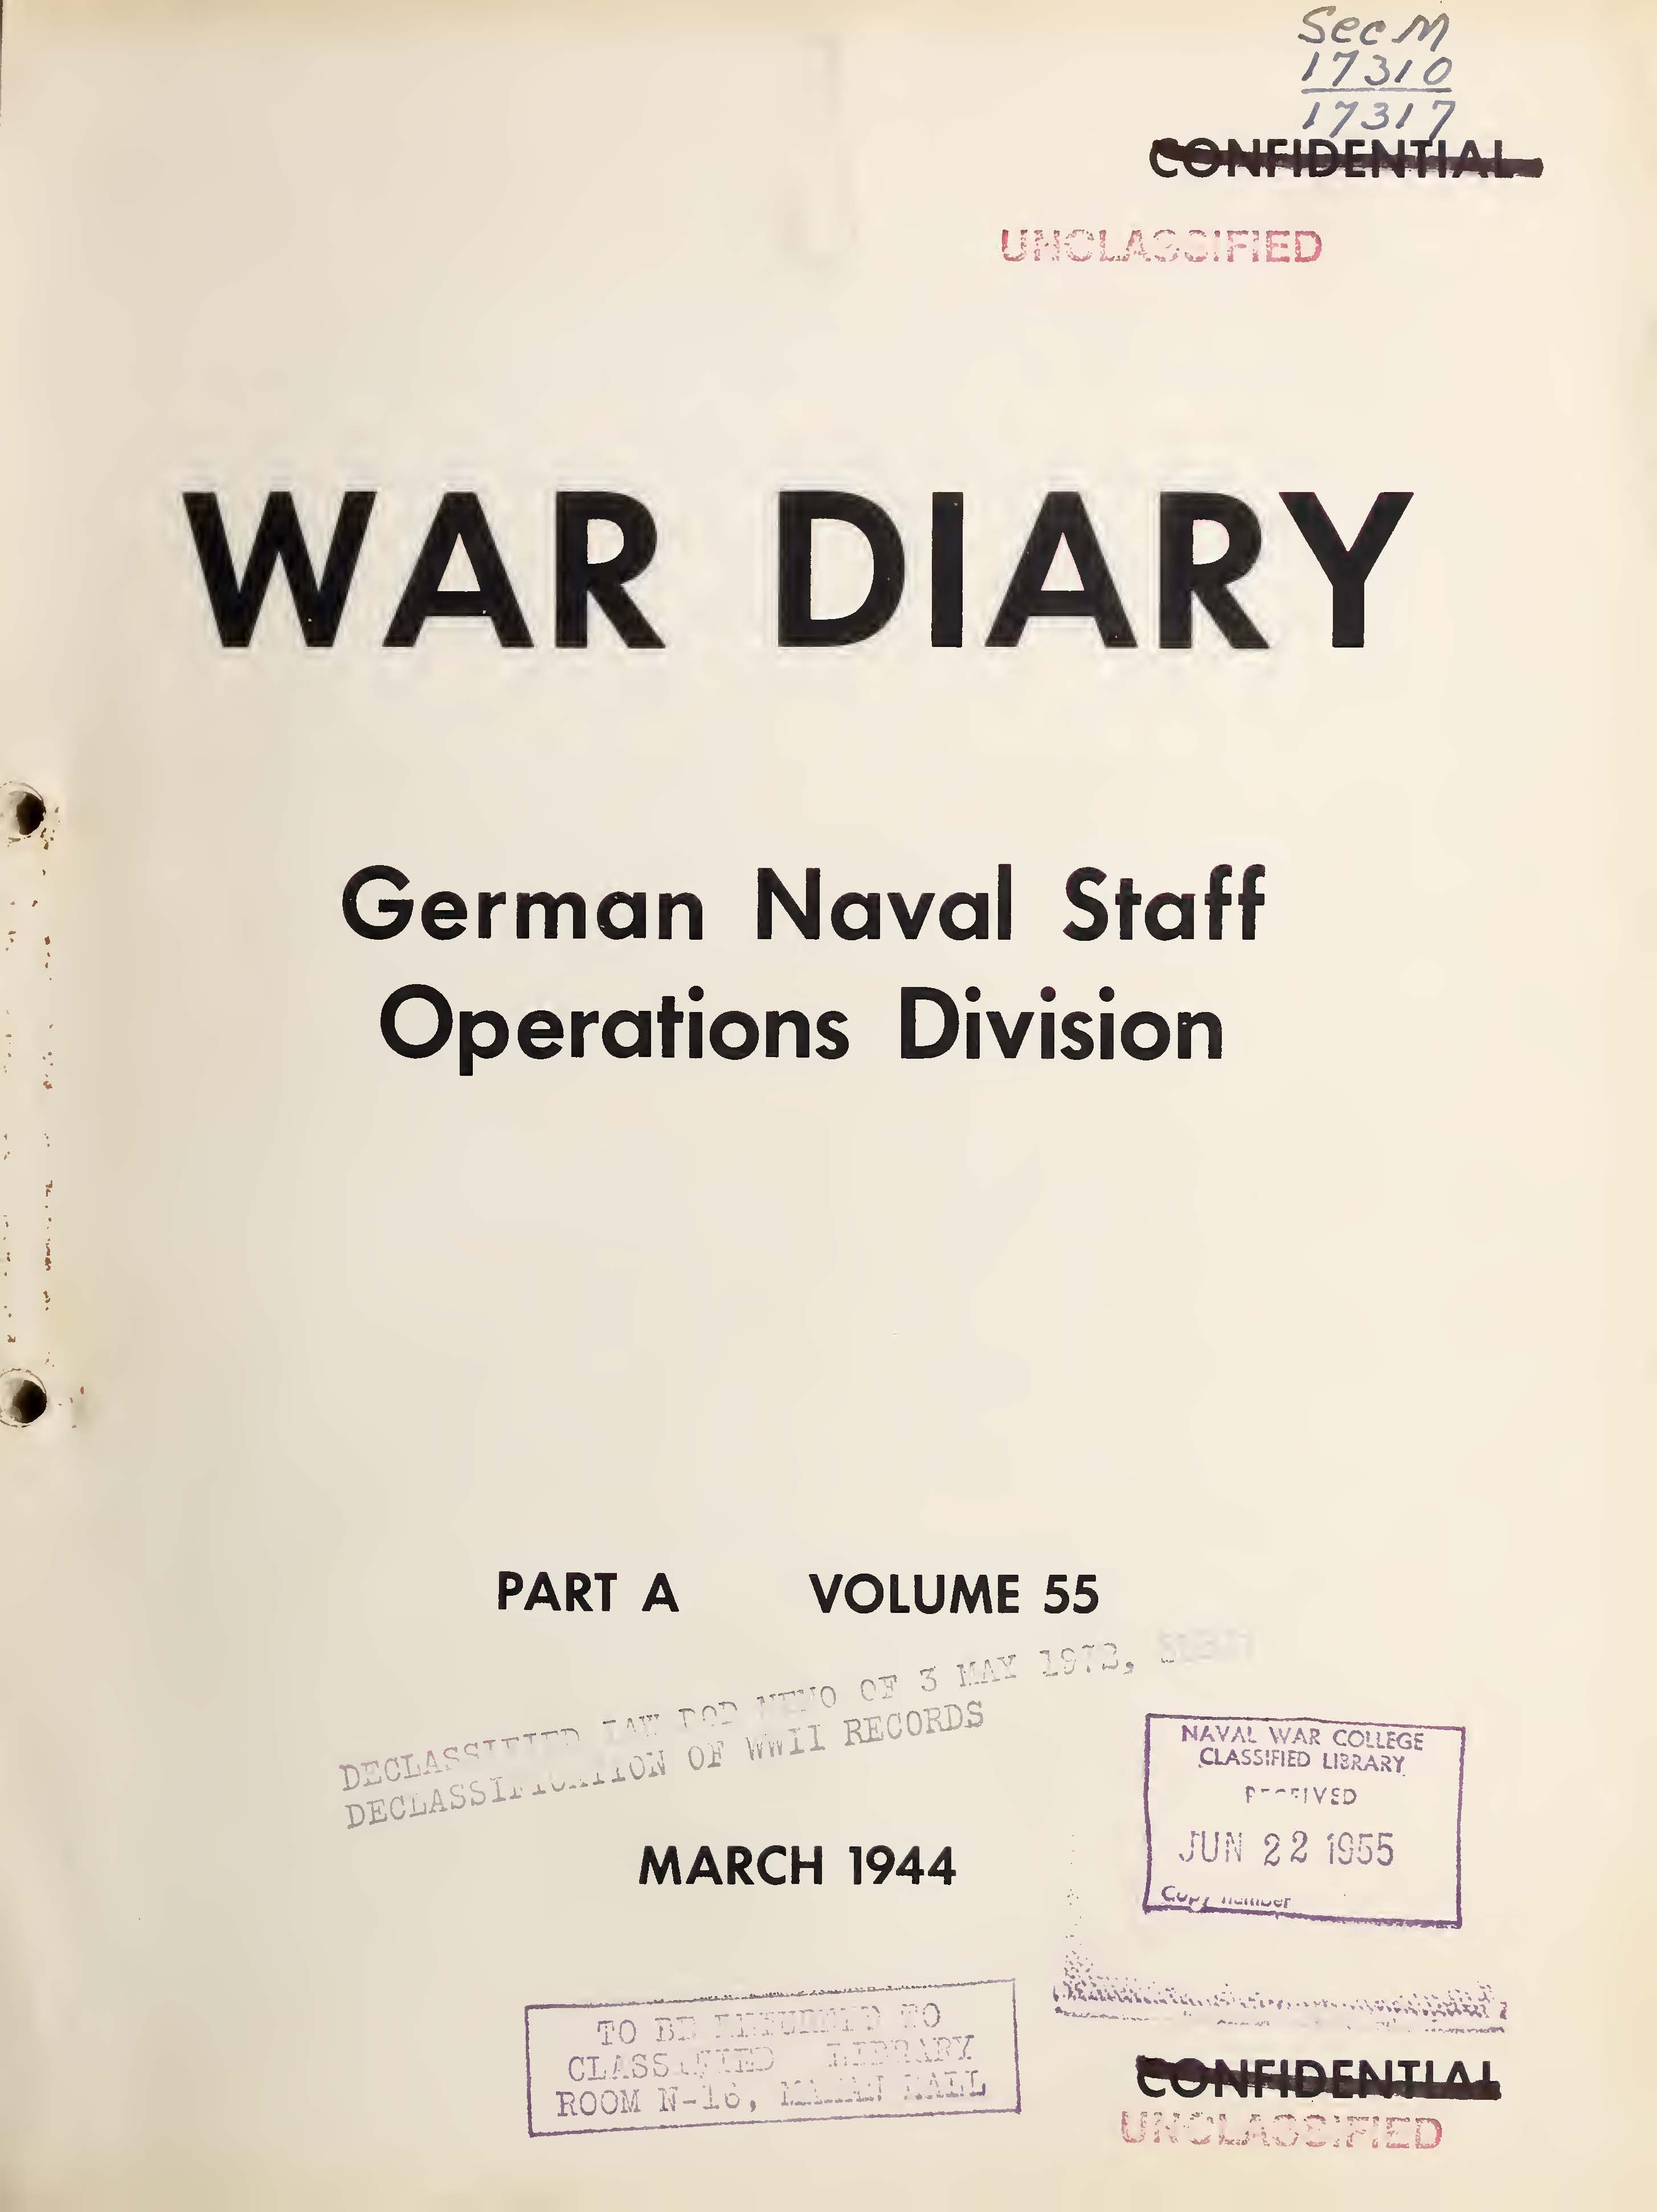 War Diary of German Naval Staff (Operations Division) Part A, Volume 55, March 1944